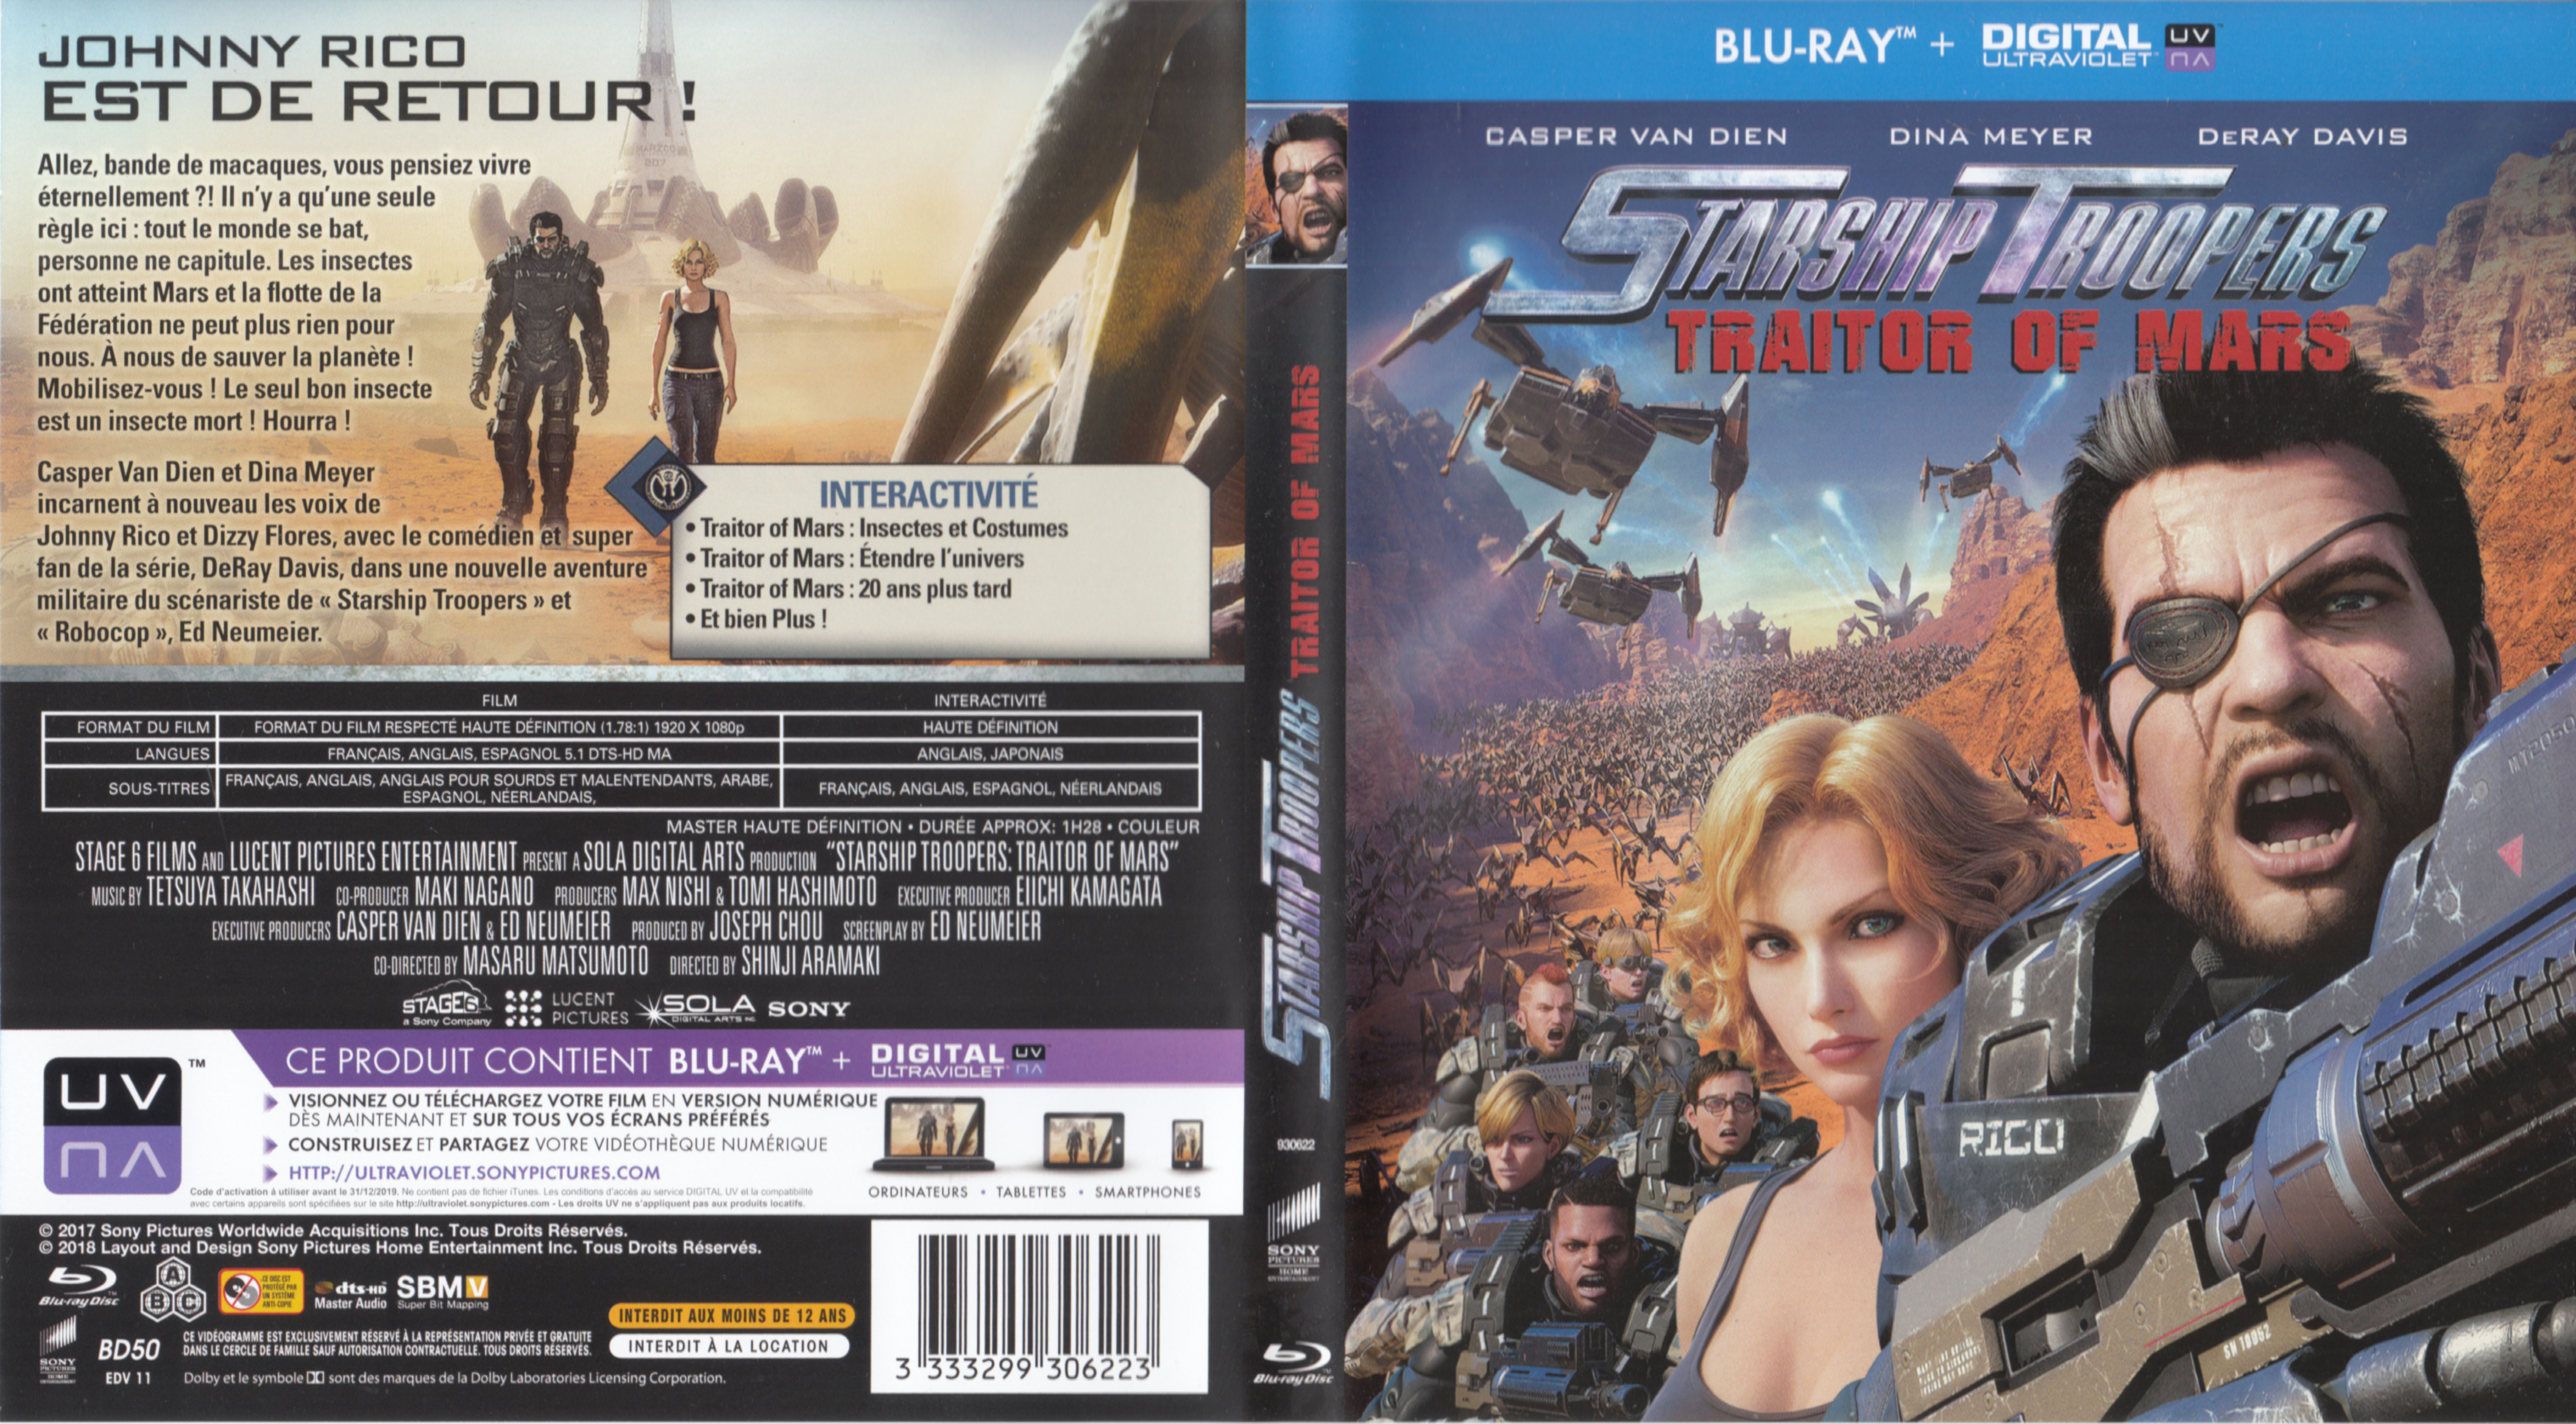 Jaquette DVD Starship Troopers Traitor of Mars (BLU-RAY)